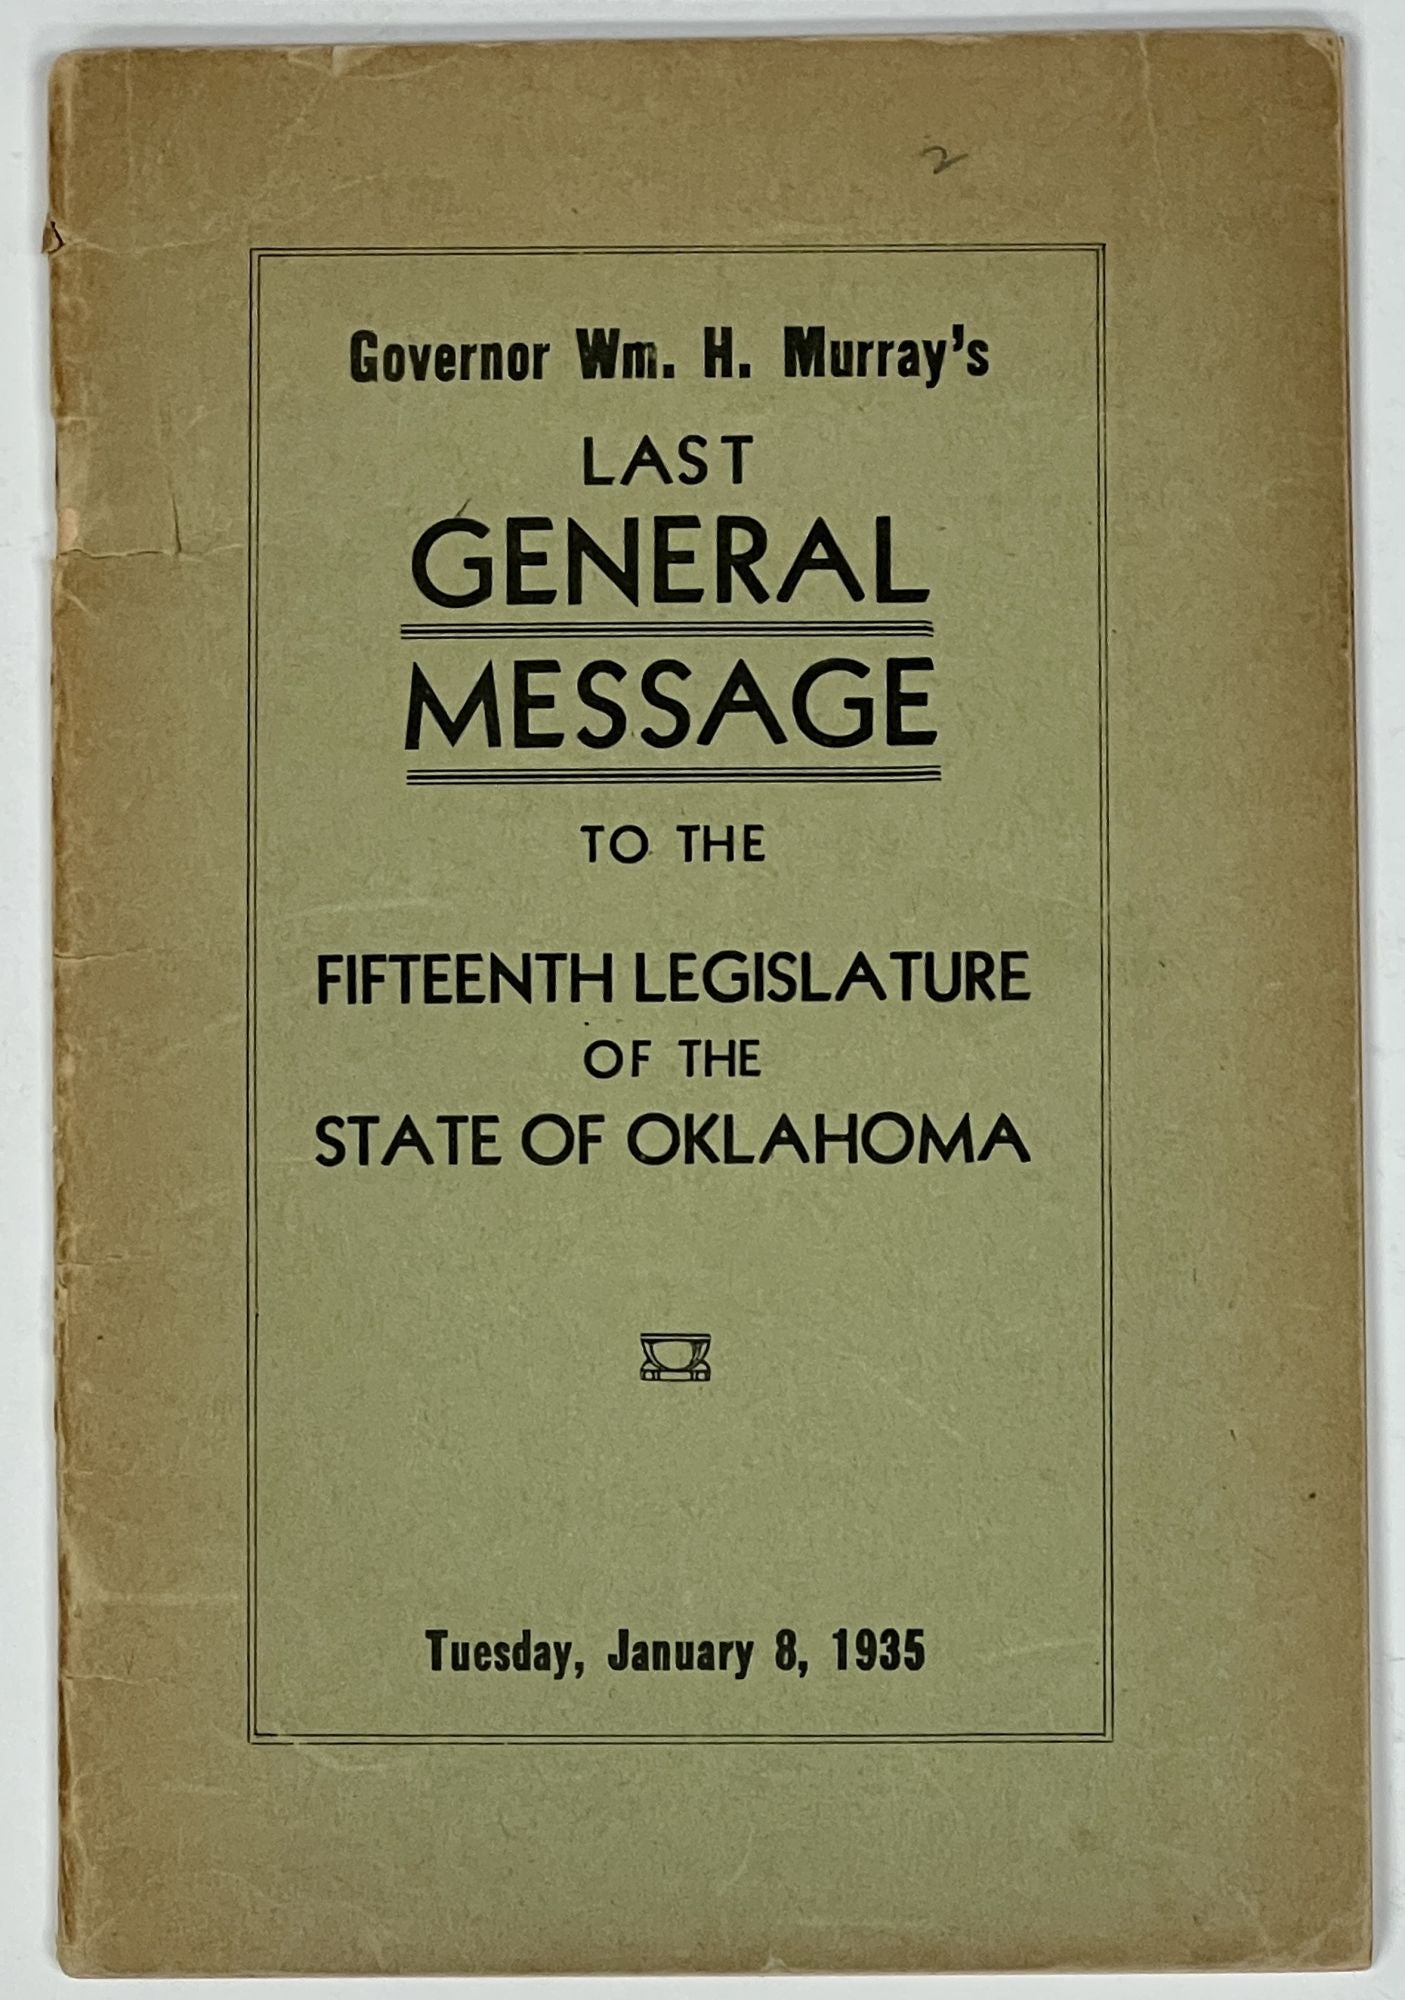 Murray, William H. - GOVERNOR WM. H. MURRAY'S LAST GENERAL MESSAGE To The FIFTEENTH LEGISLATURE Of The STATE Of OKLAHOMA